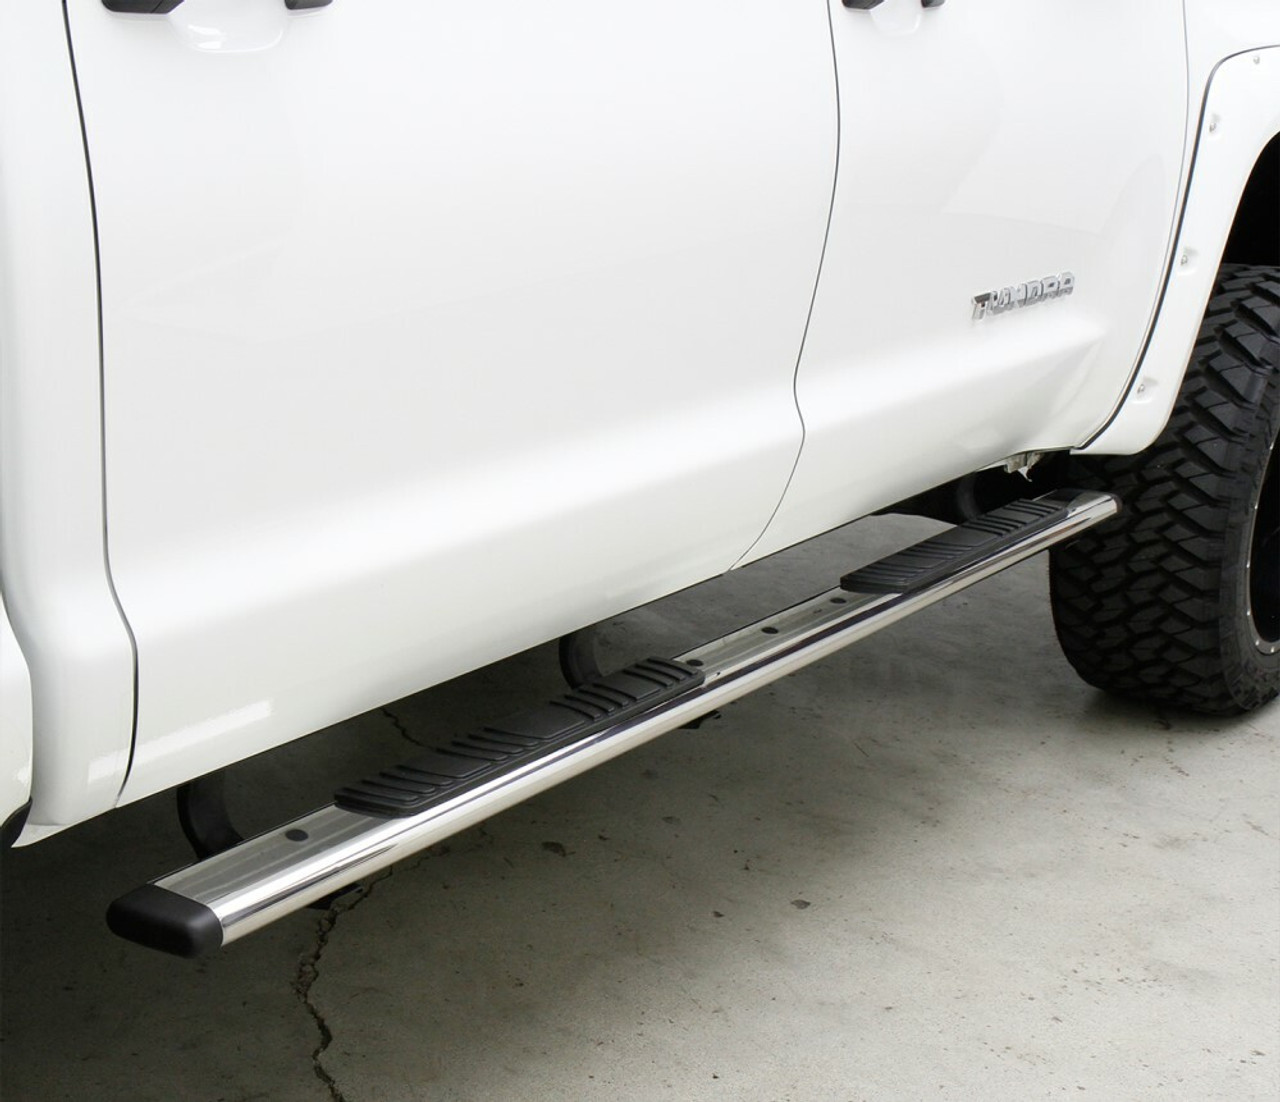 Go Rhino 685415587PS Ford, F-250, F-350 Super Duty, 2017 - 2021, 5 inch OE Xtreme Low Profile - Complete Kit: Sidesteps + Brackets, Stainless steel, Polished, 650087PS side bars + 6841555 OE Xtreme Brackets. 5 inch wide x 87 inch long side bars